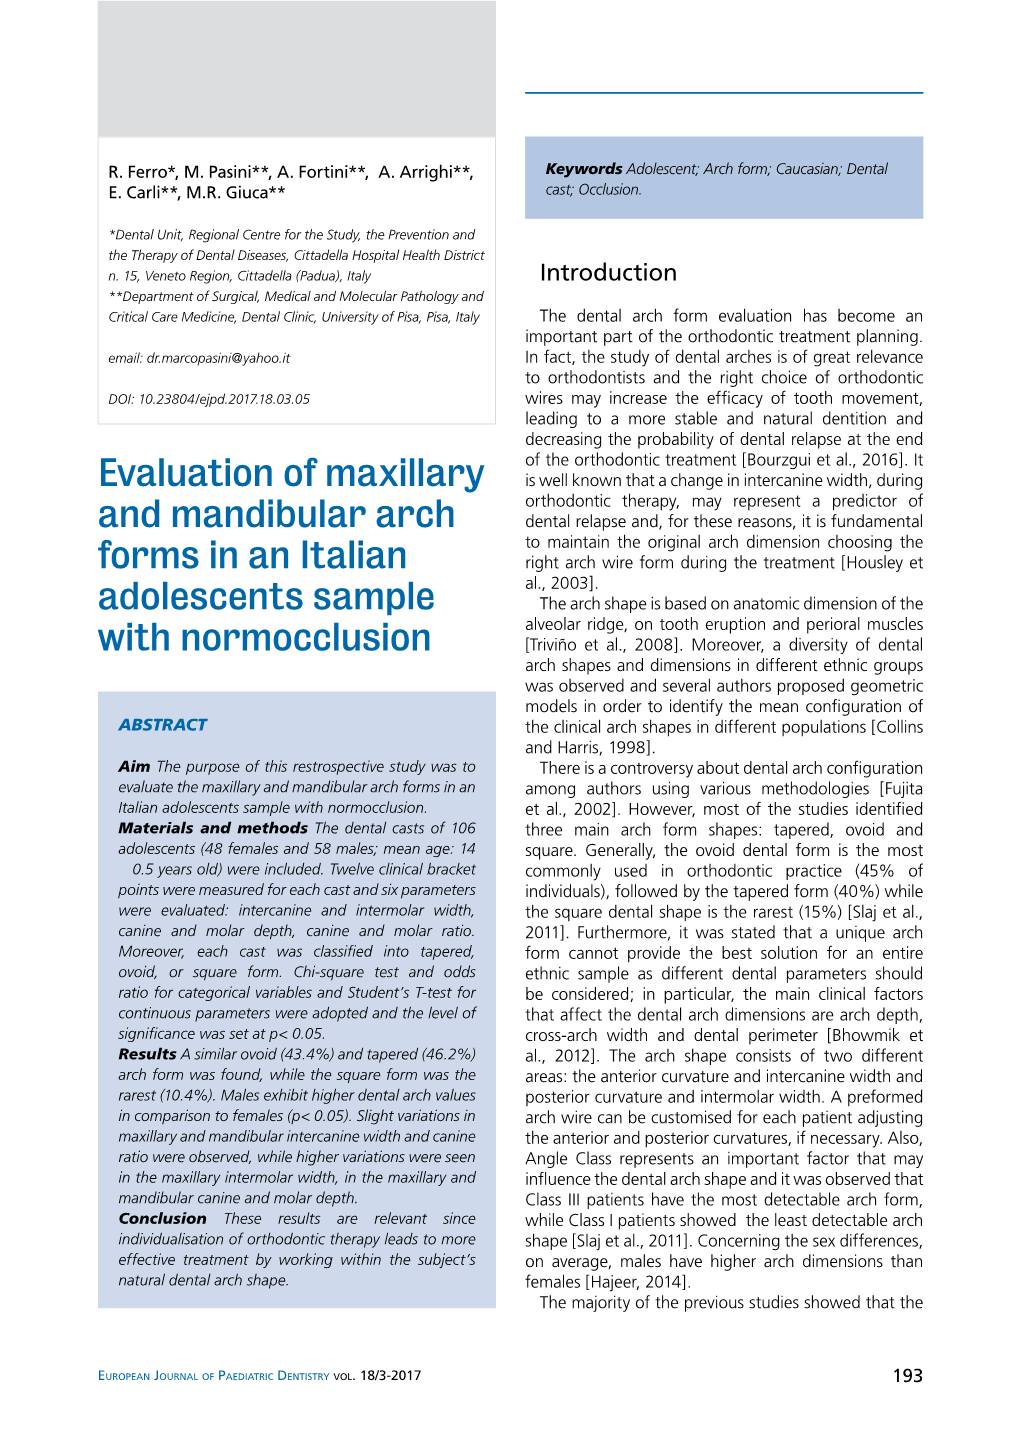 Evaluation of Maxillary and Mandibular Arch Forms in an Italian